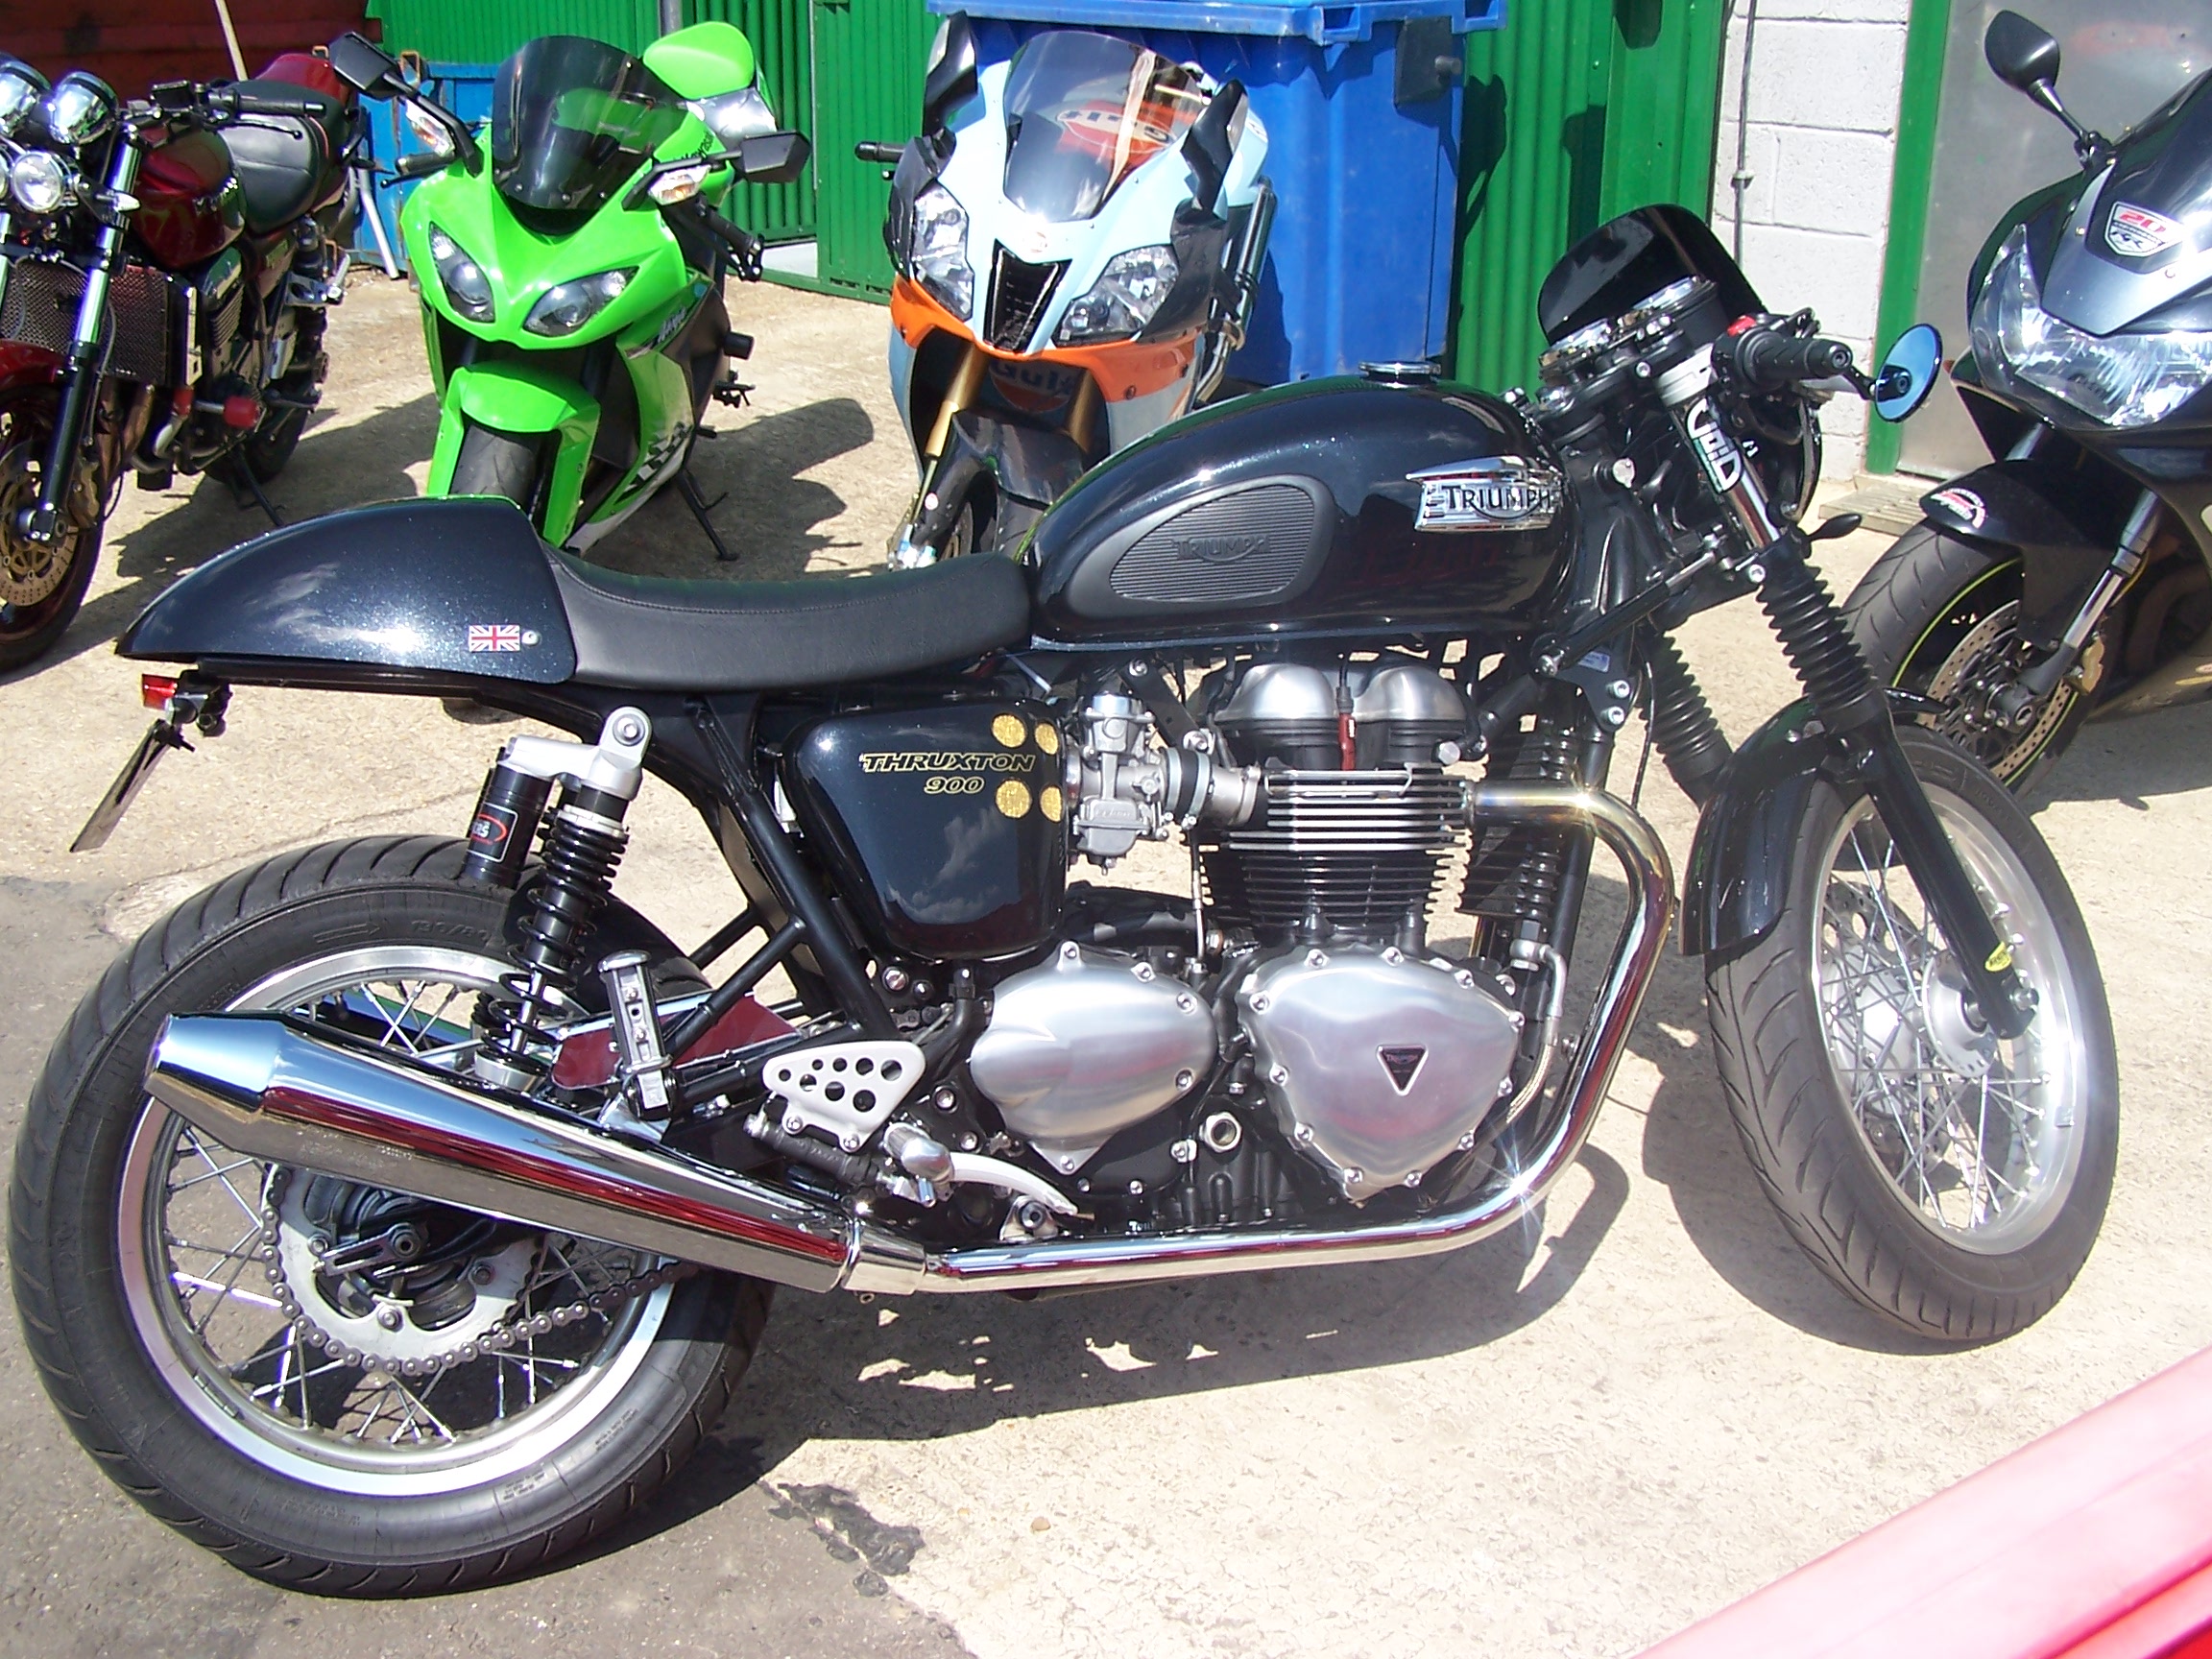 Triumph Thruxton ECU remap – fit open pipes and you’ll need one!